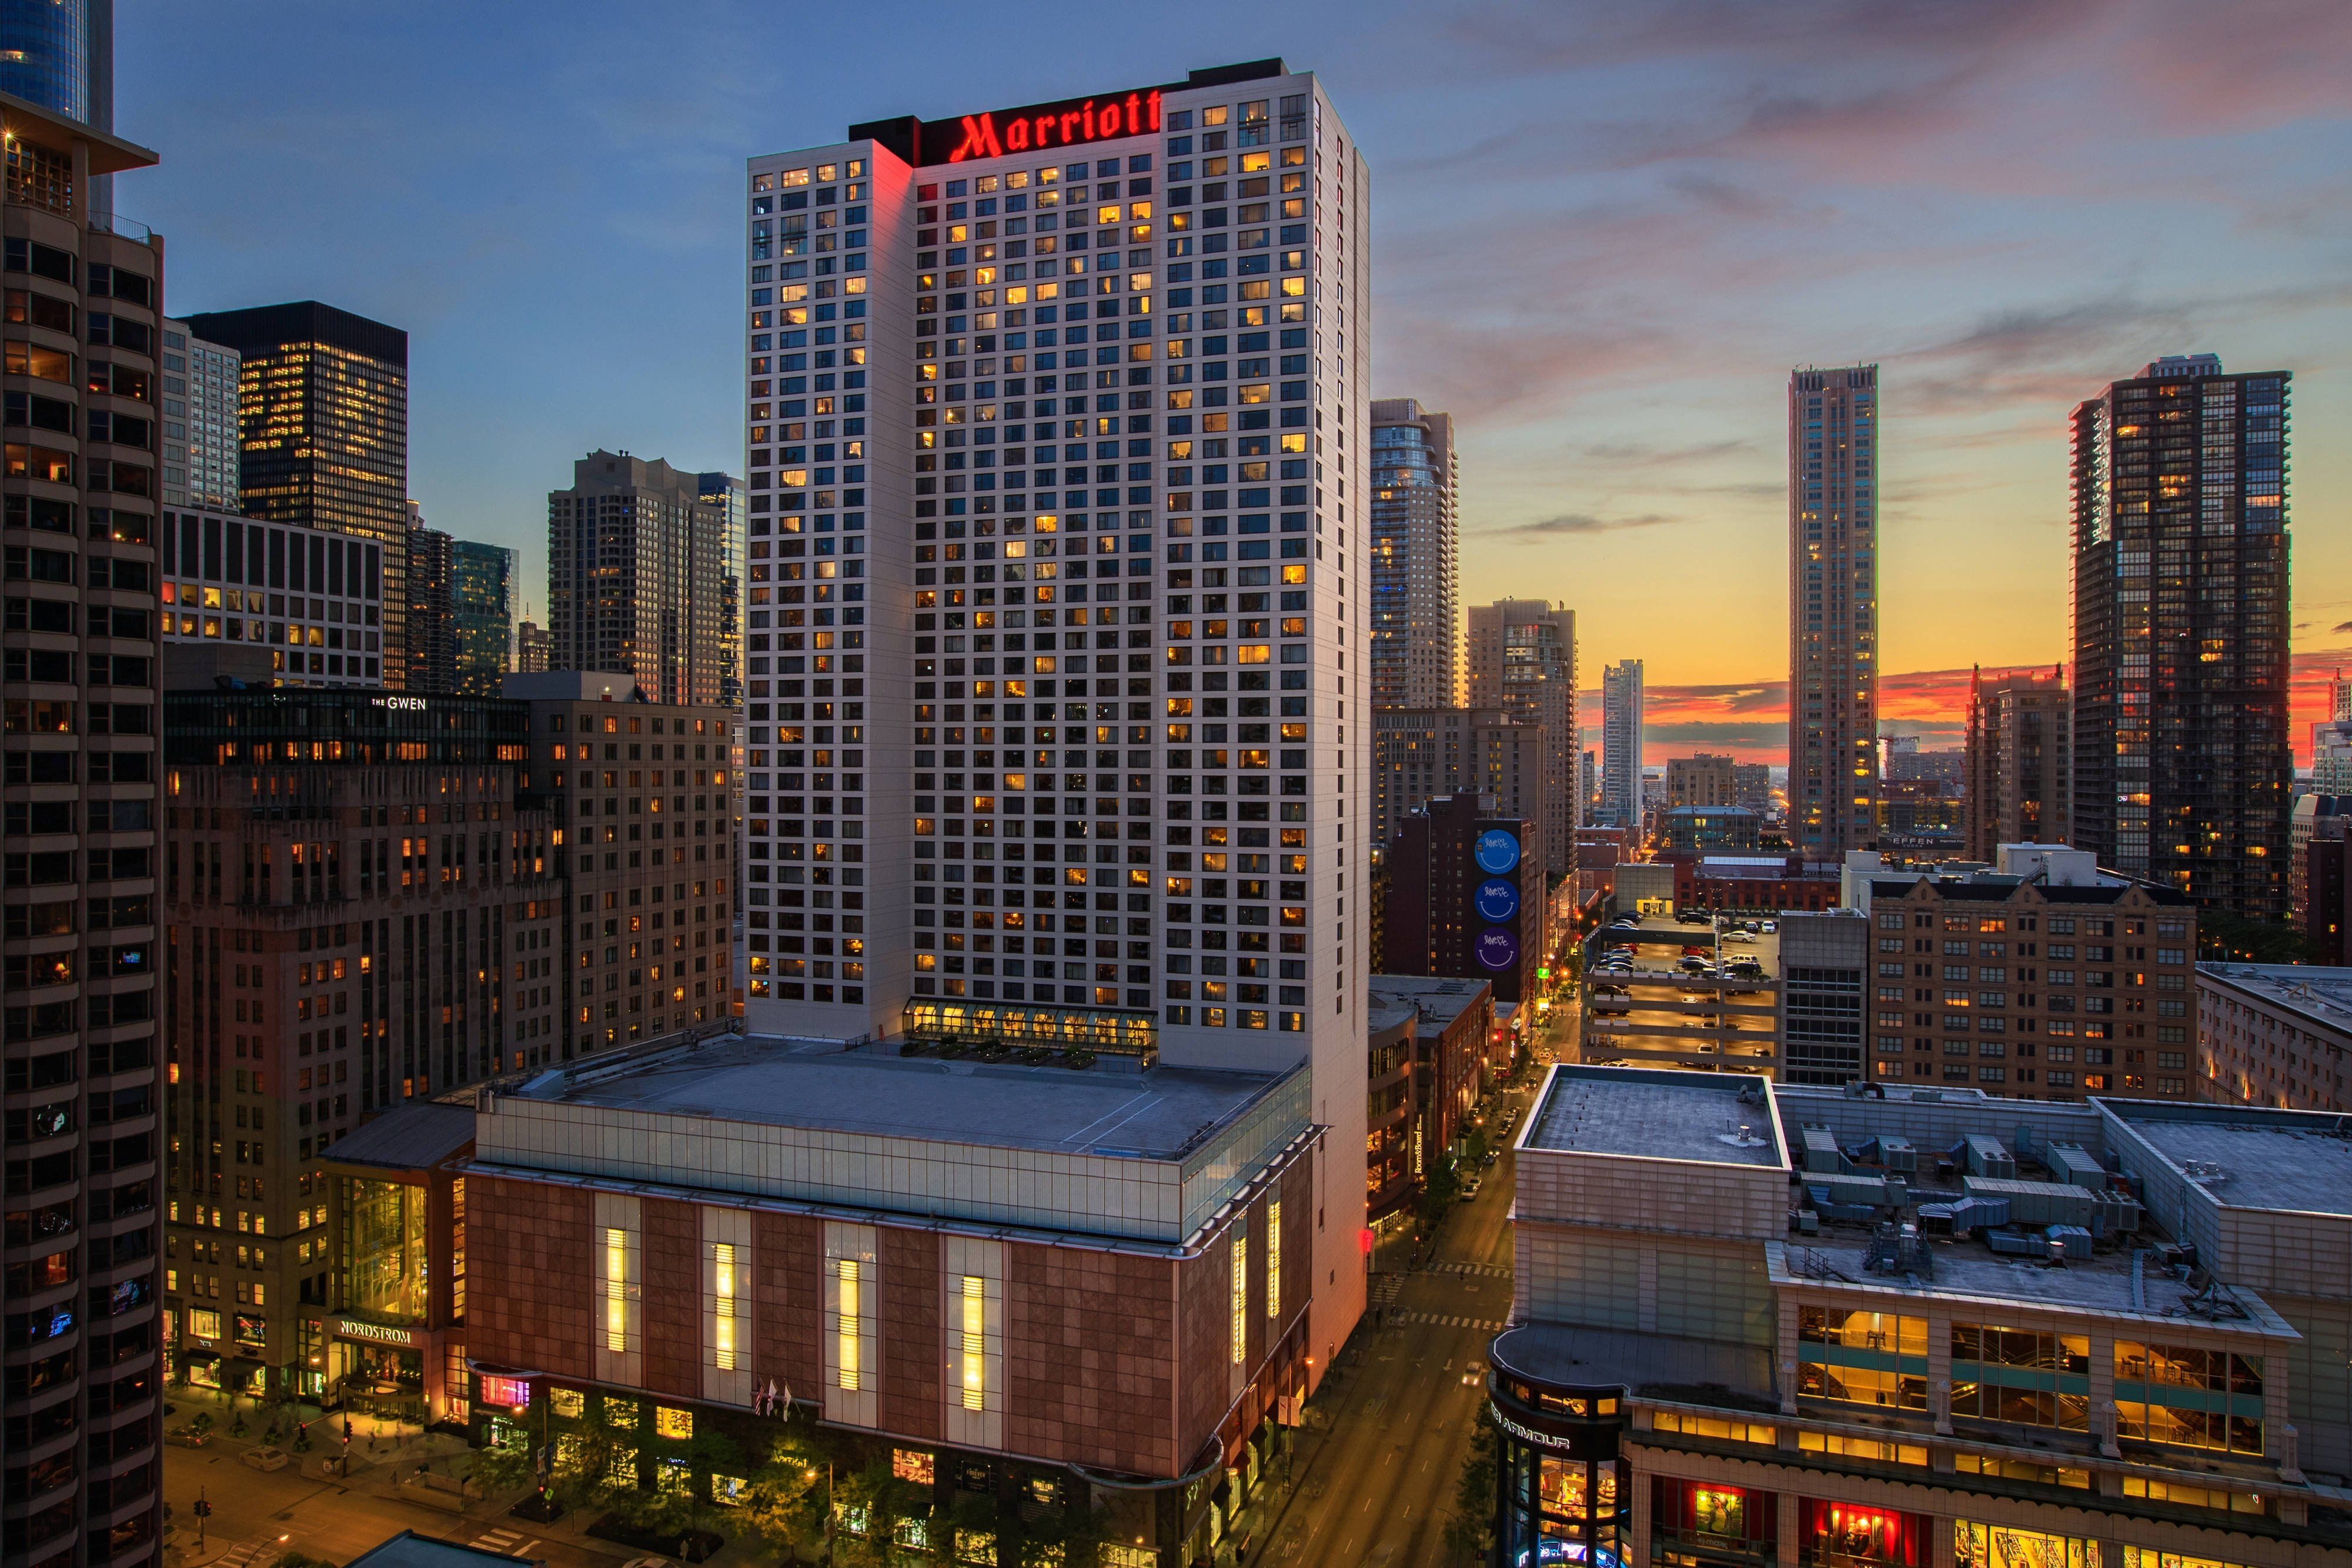 Chicago Marriott Dtwn Magnificent Mile Chicago, IL Hotels First Class